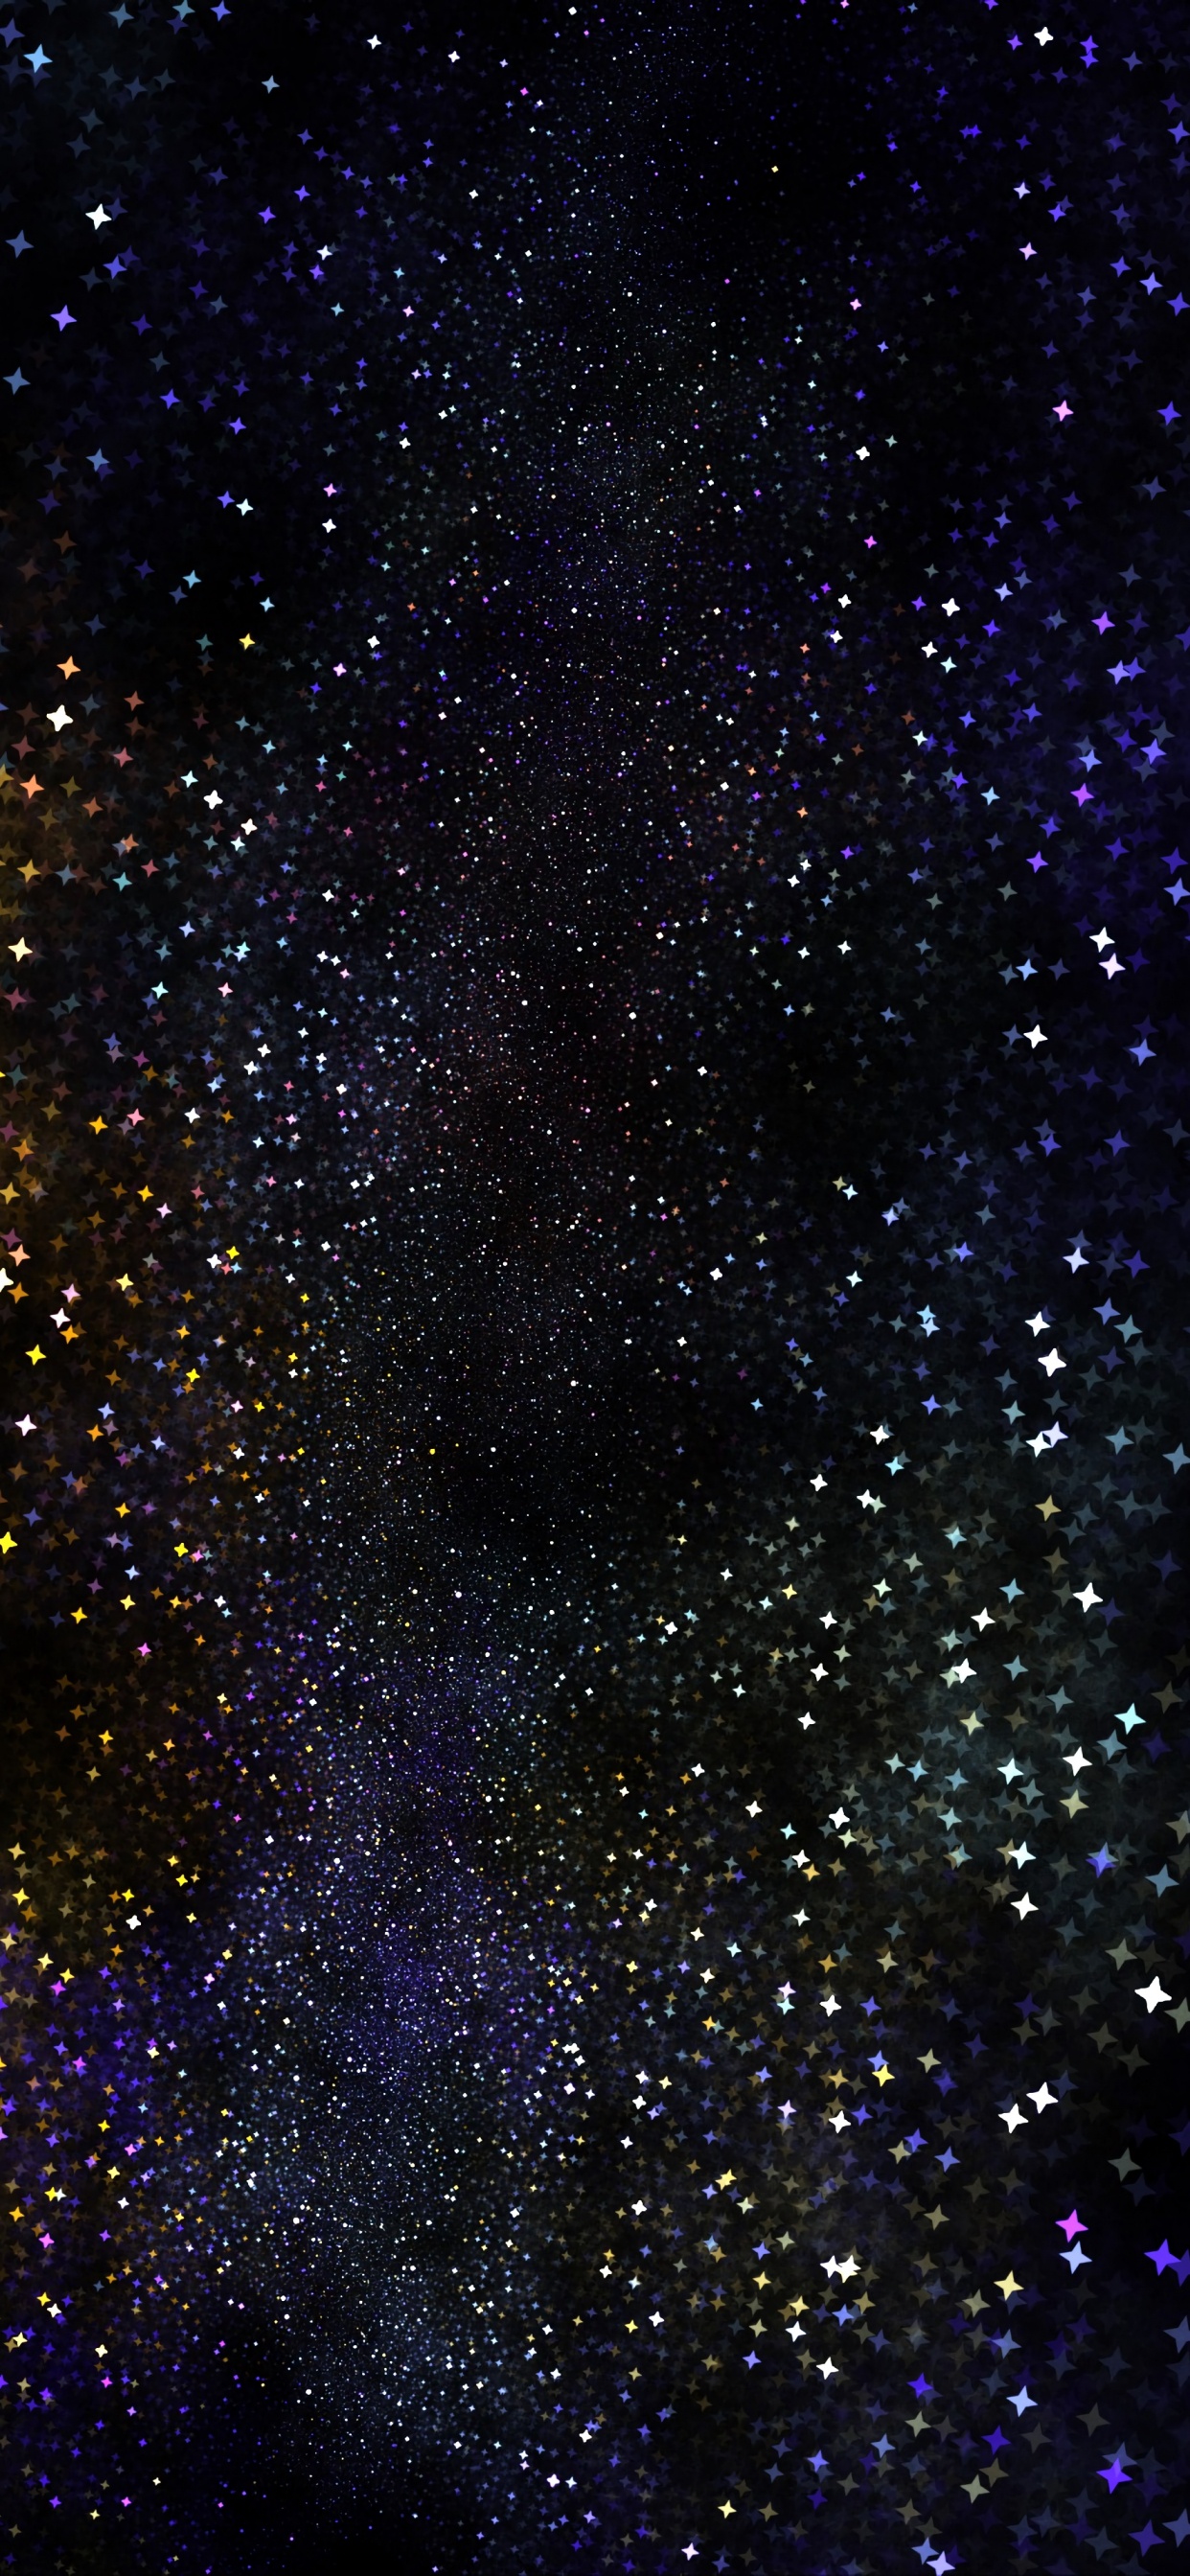 Starry Night Sky Over Starry Night. Wallpaper in 1242x2688 Resolution